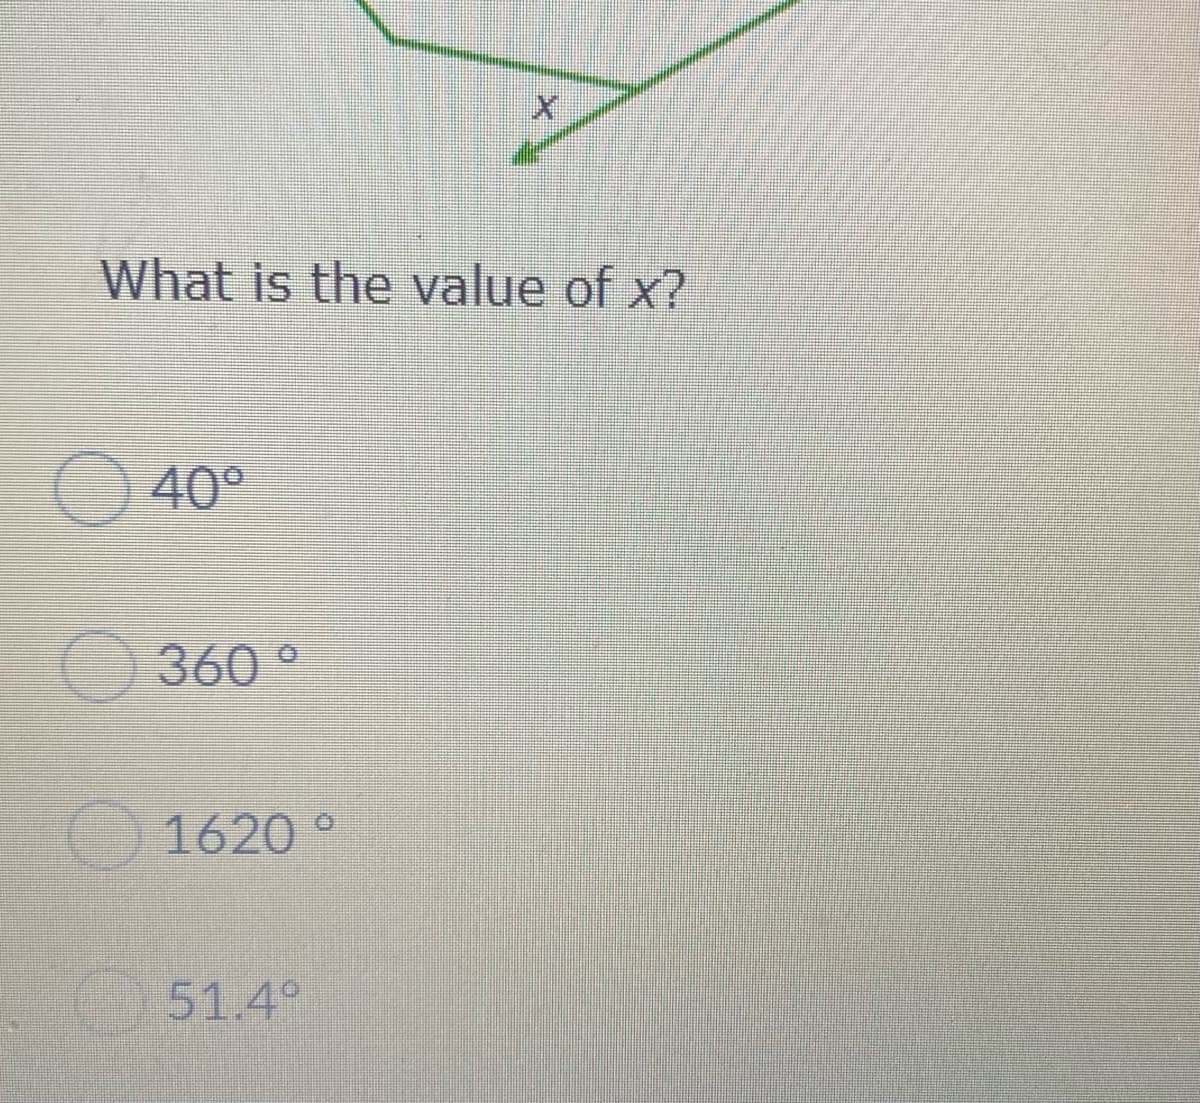 What is the value of x?
40°
360 °
1620 °
51.4°
